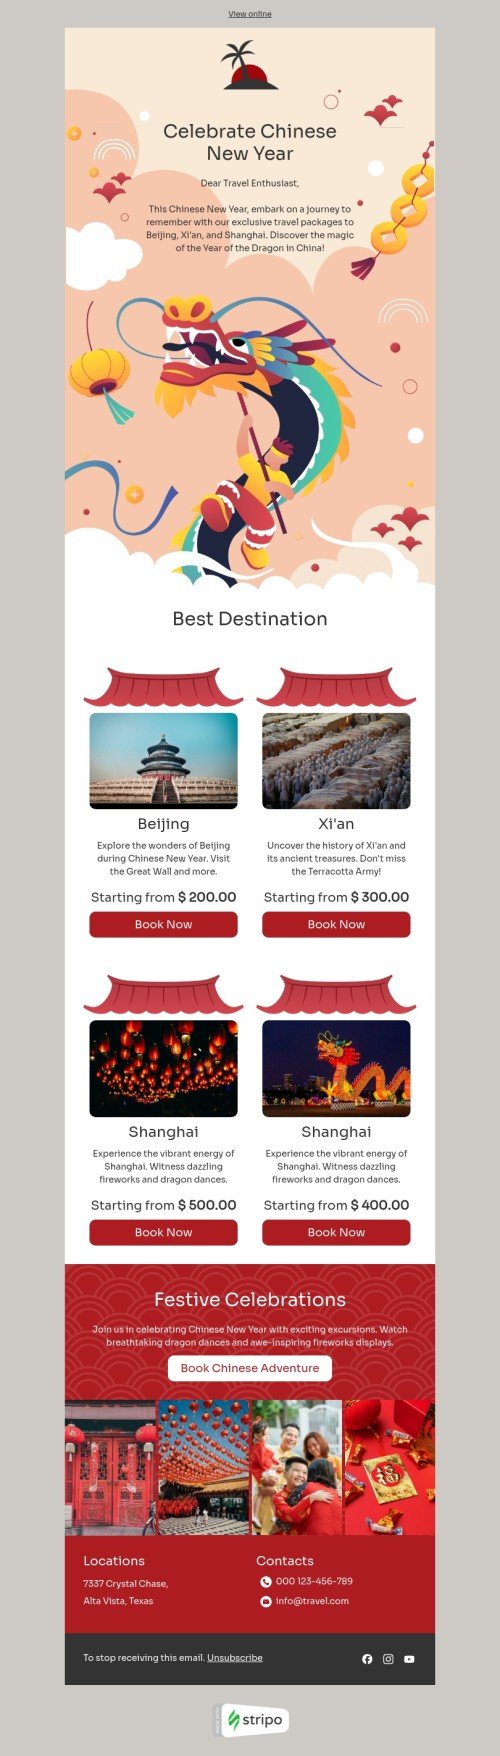 Chinese New Year email template "Year of the dragon" for travel industry desktop view